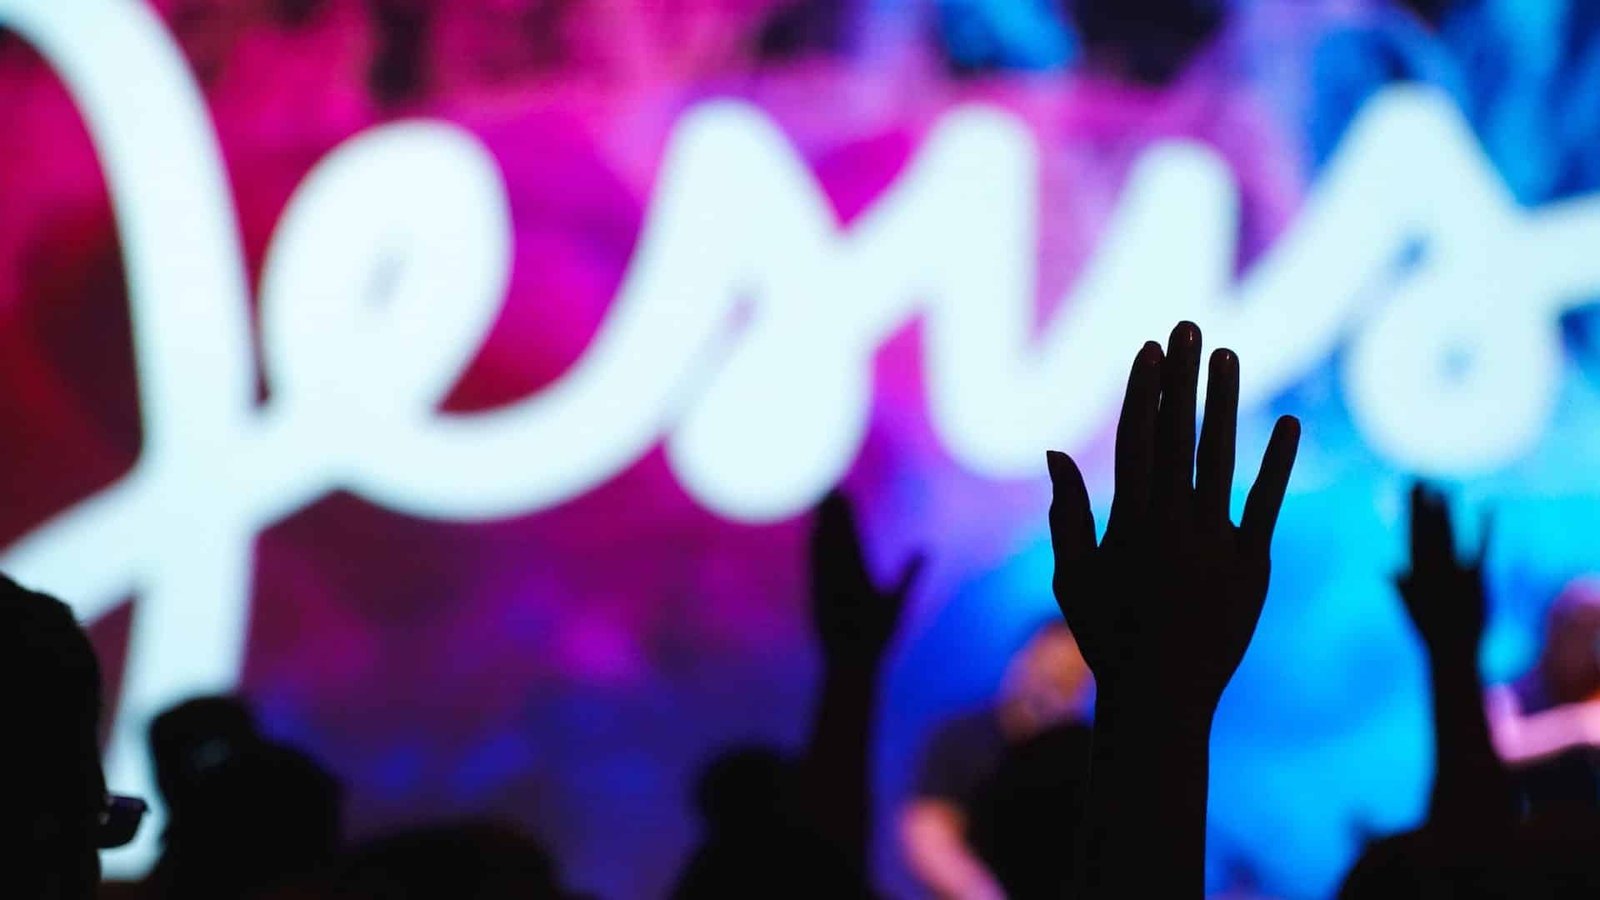 Man with hands raised in worship